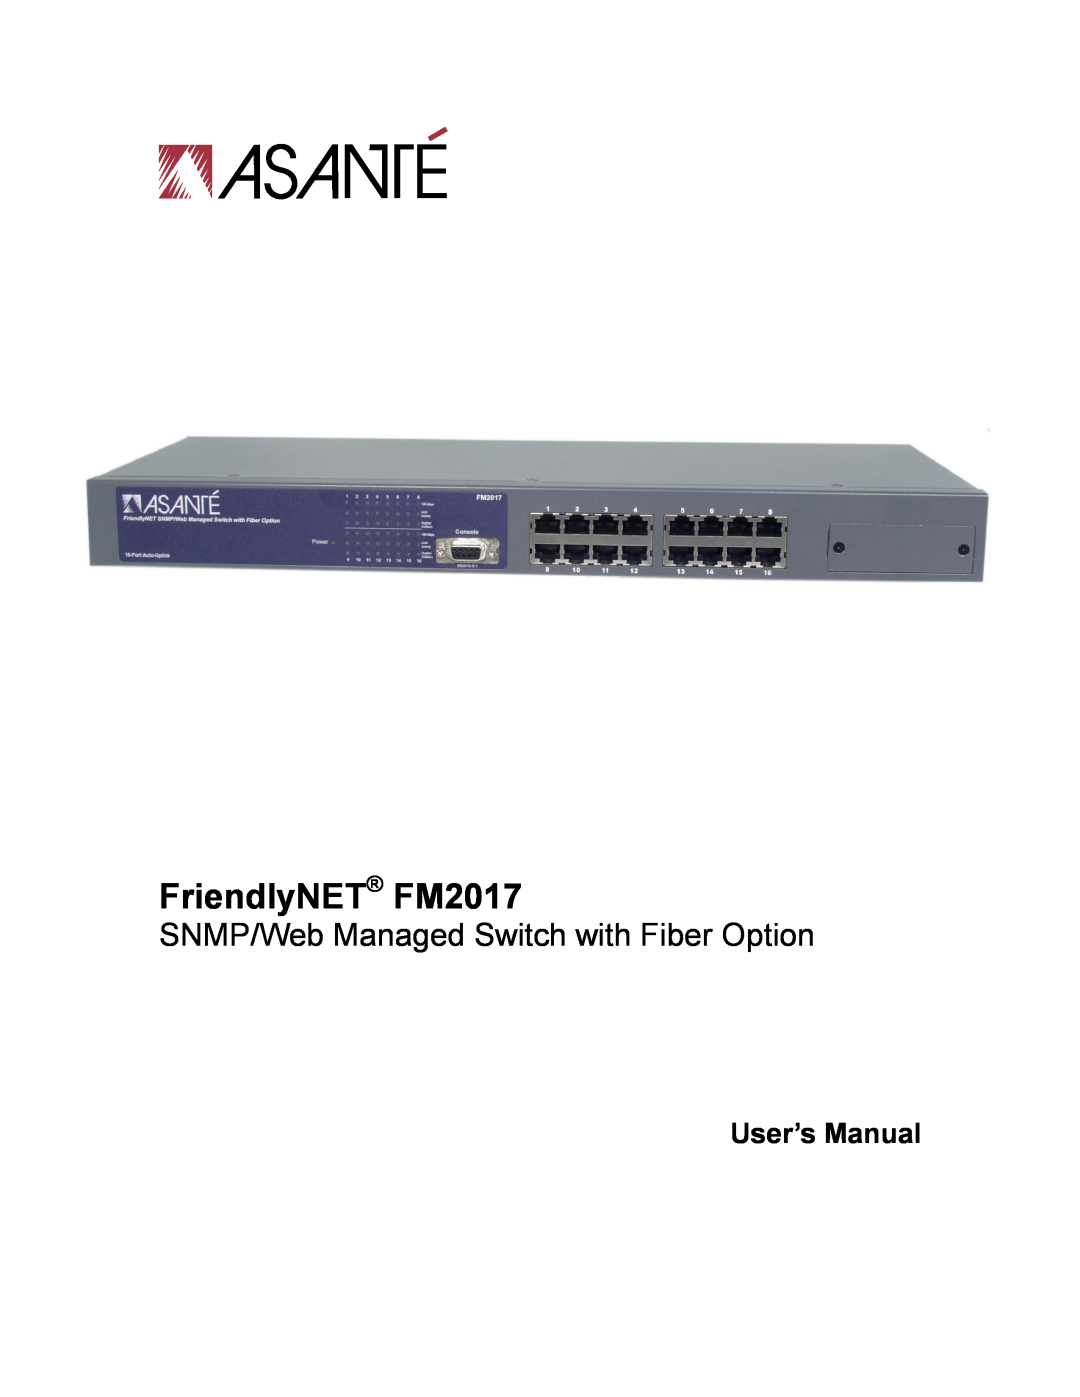 Asante Technologies user manual FriendlyNET FM2017, SNMP/Web Managed Switch with Fiber Option, User’s Manual 